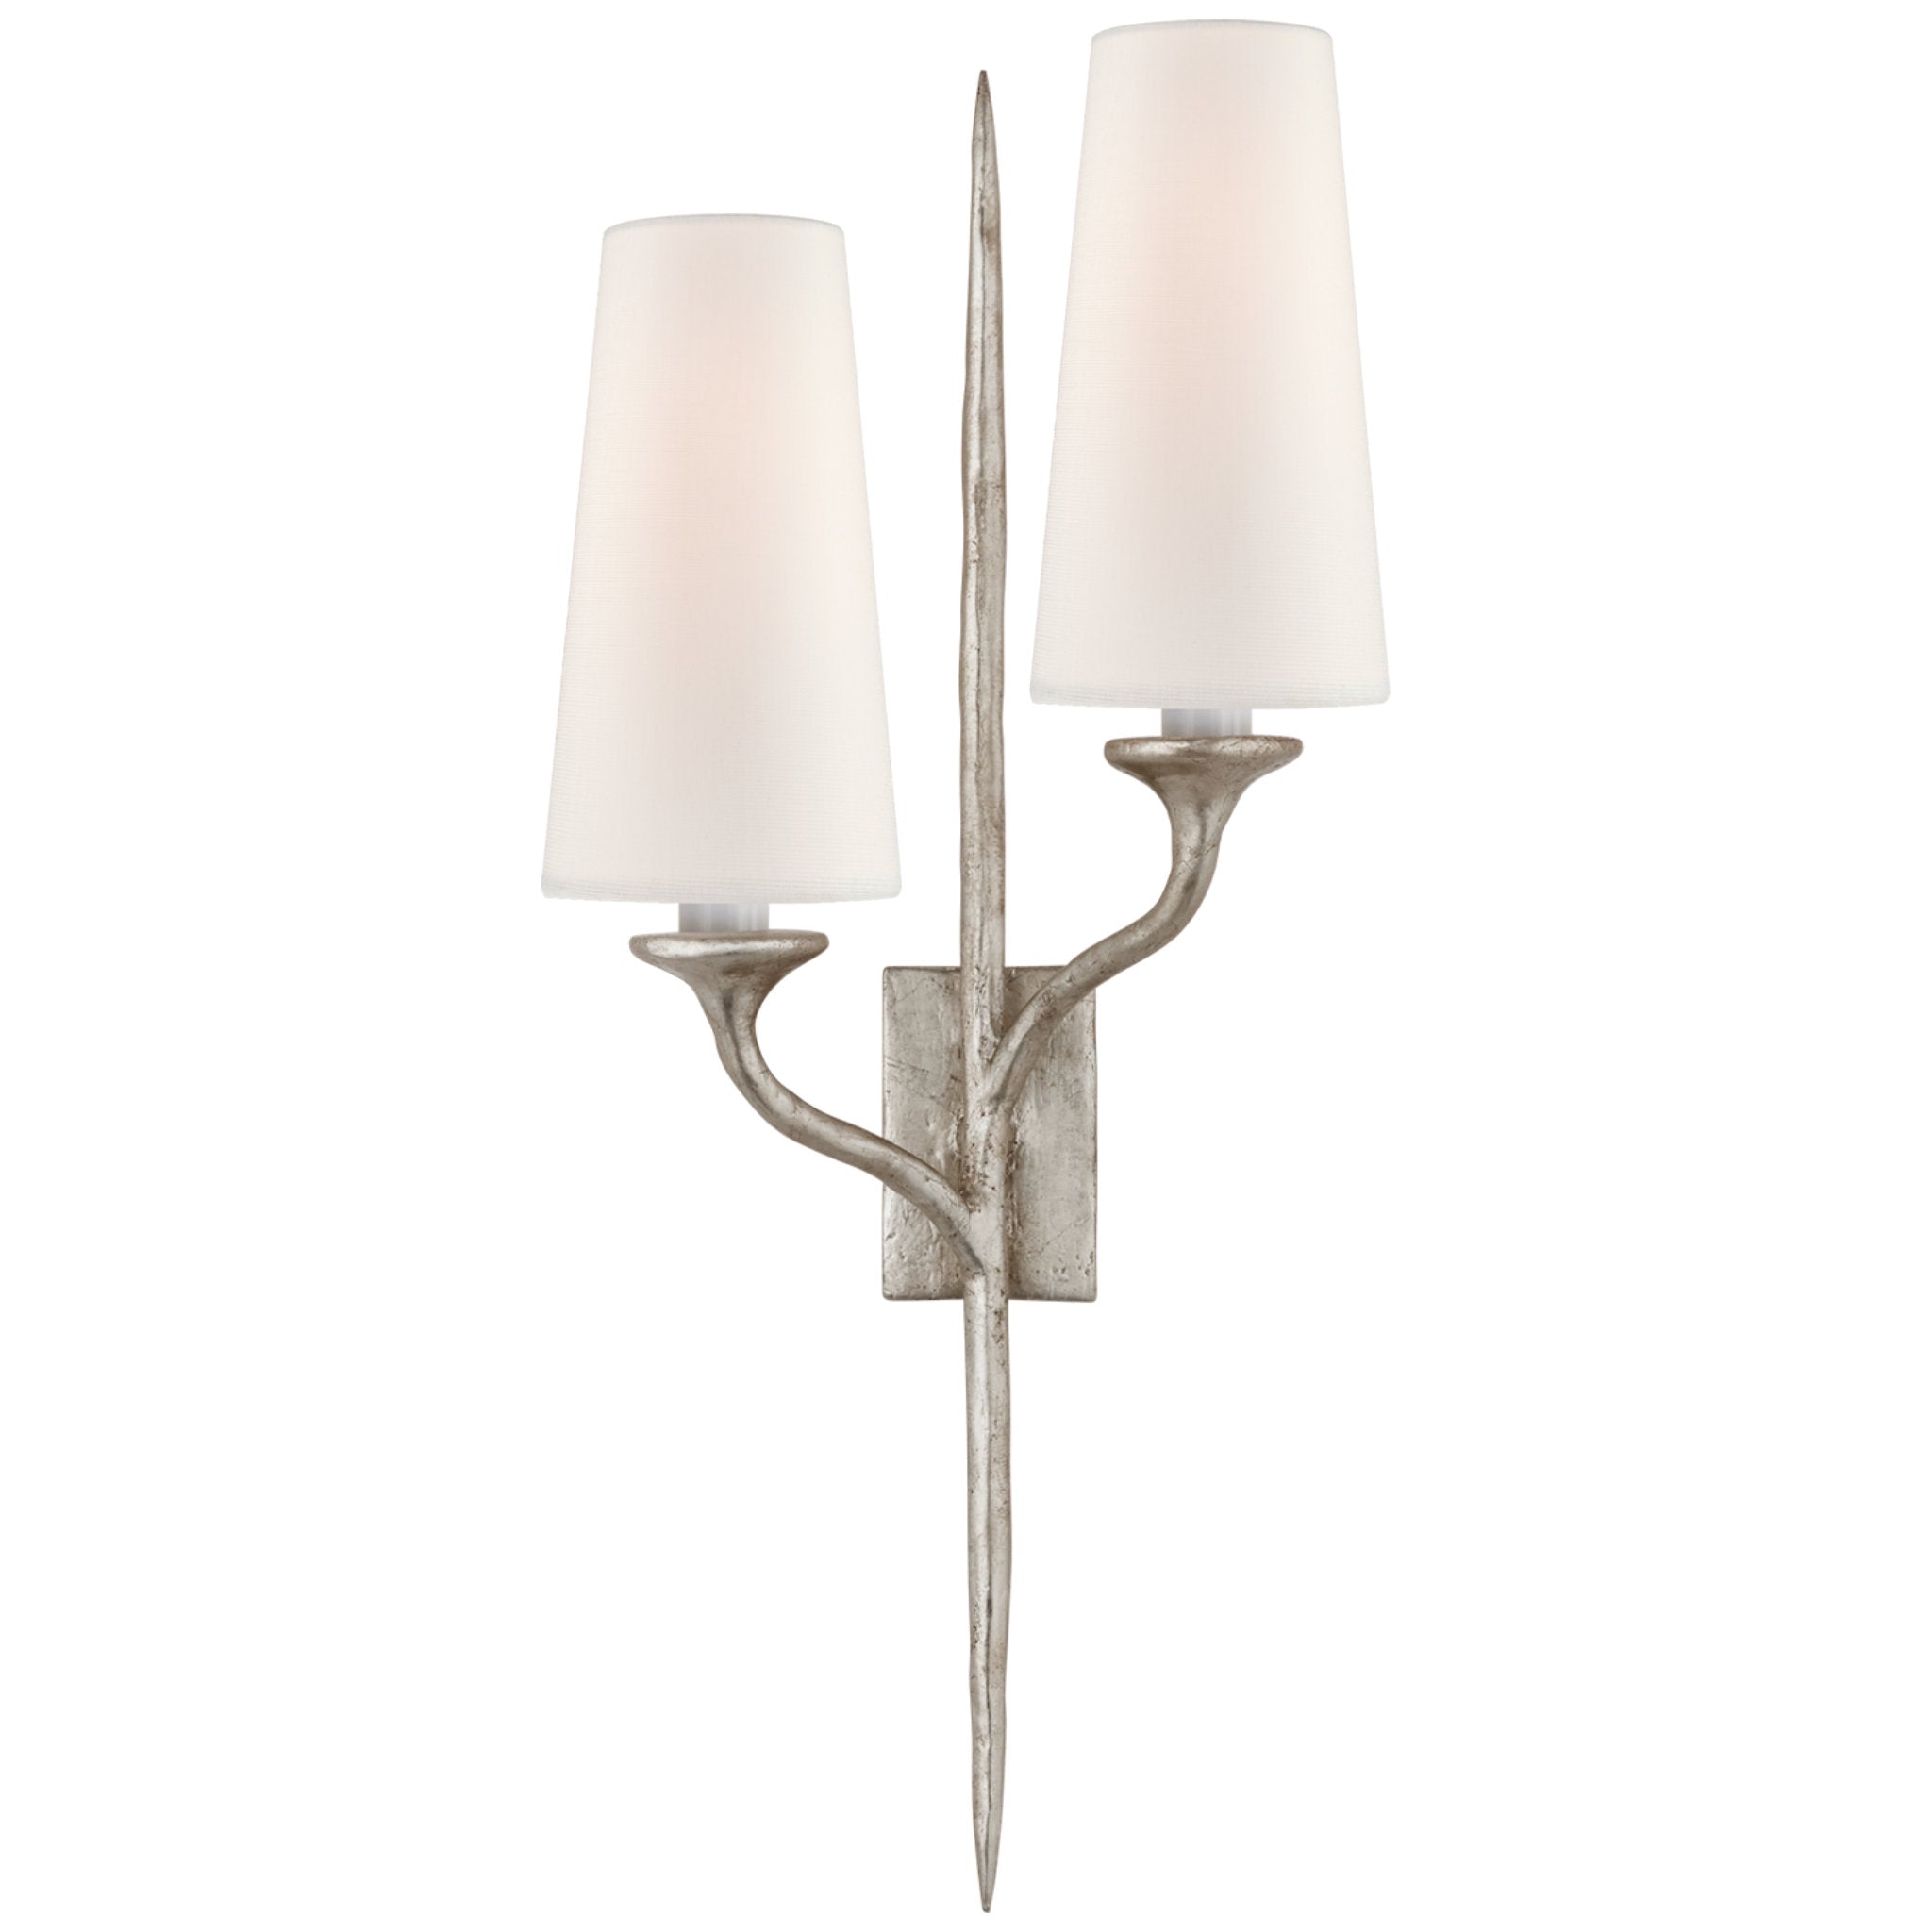 Julie Neill Iberia Double Right Sconce in Burnished Silver Leaf with Linen Shades